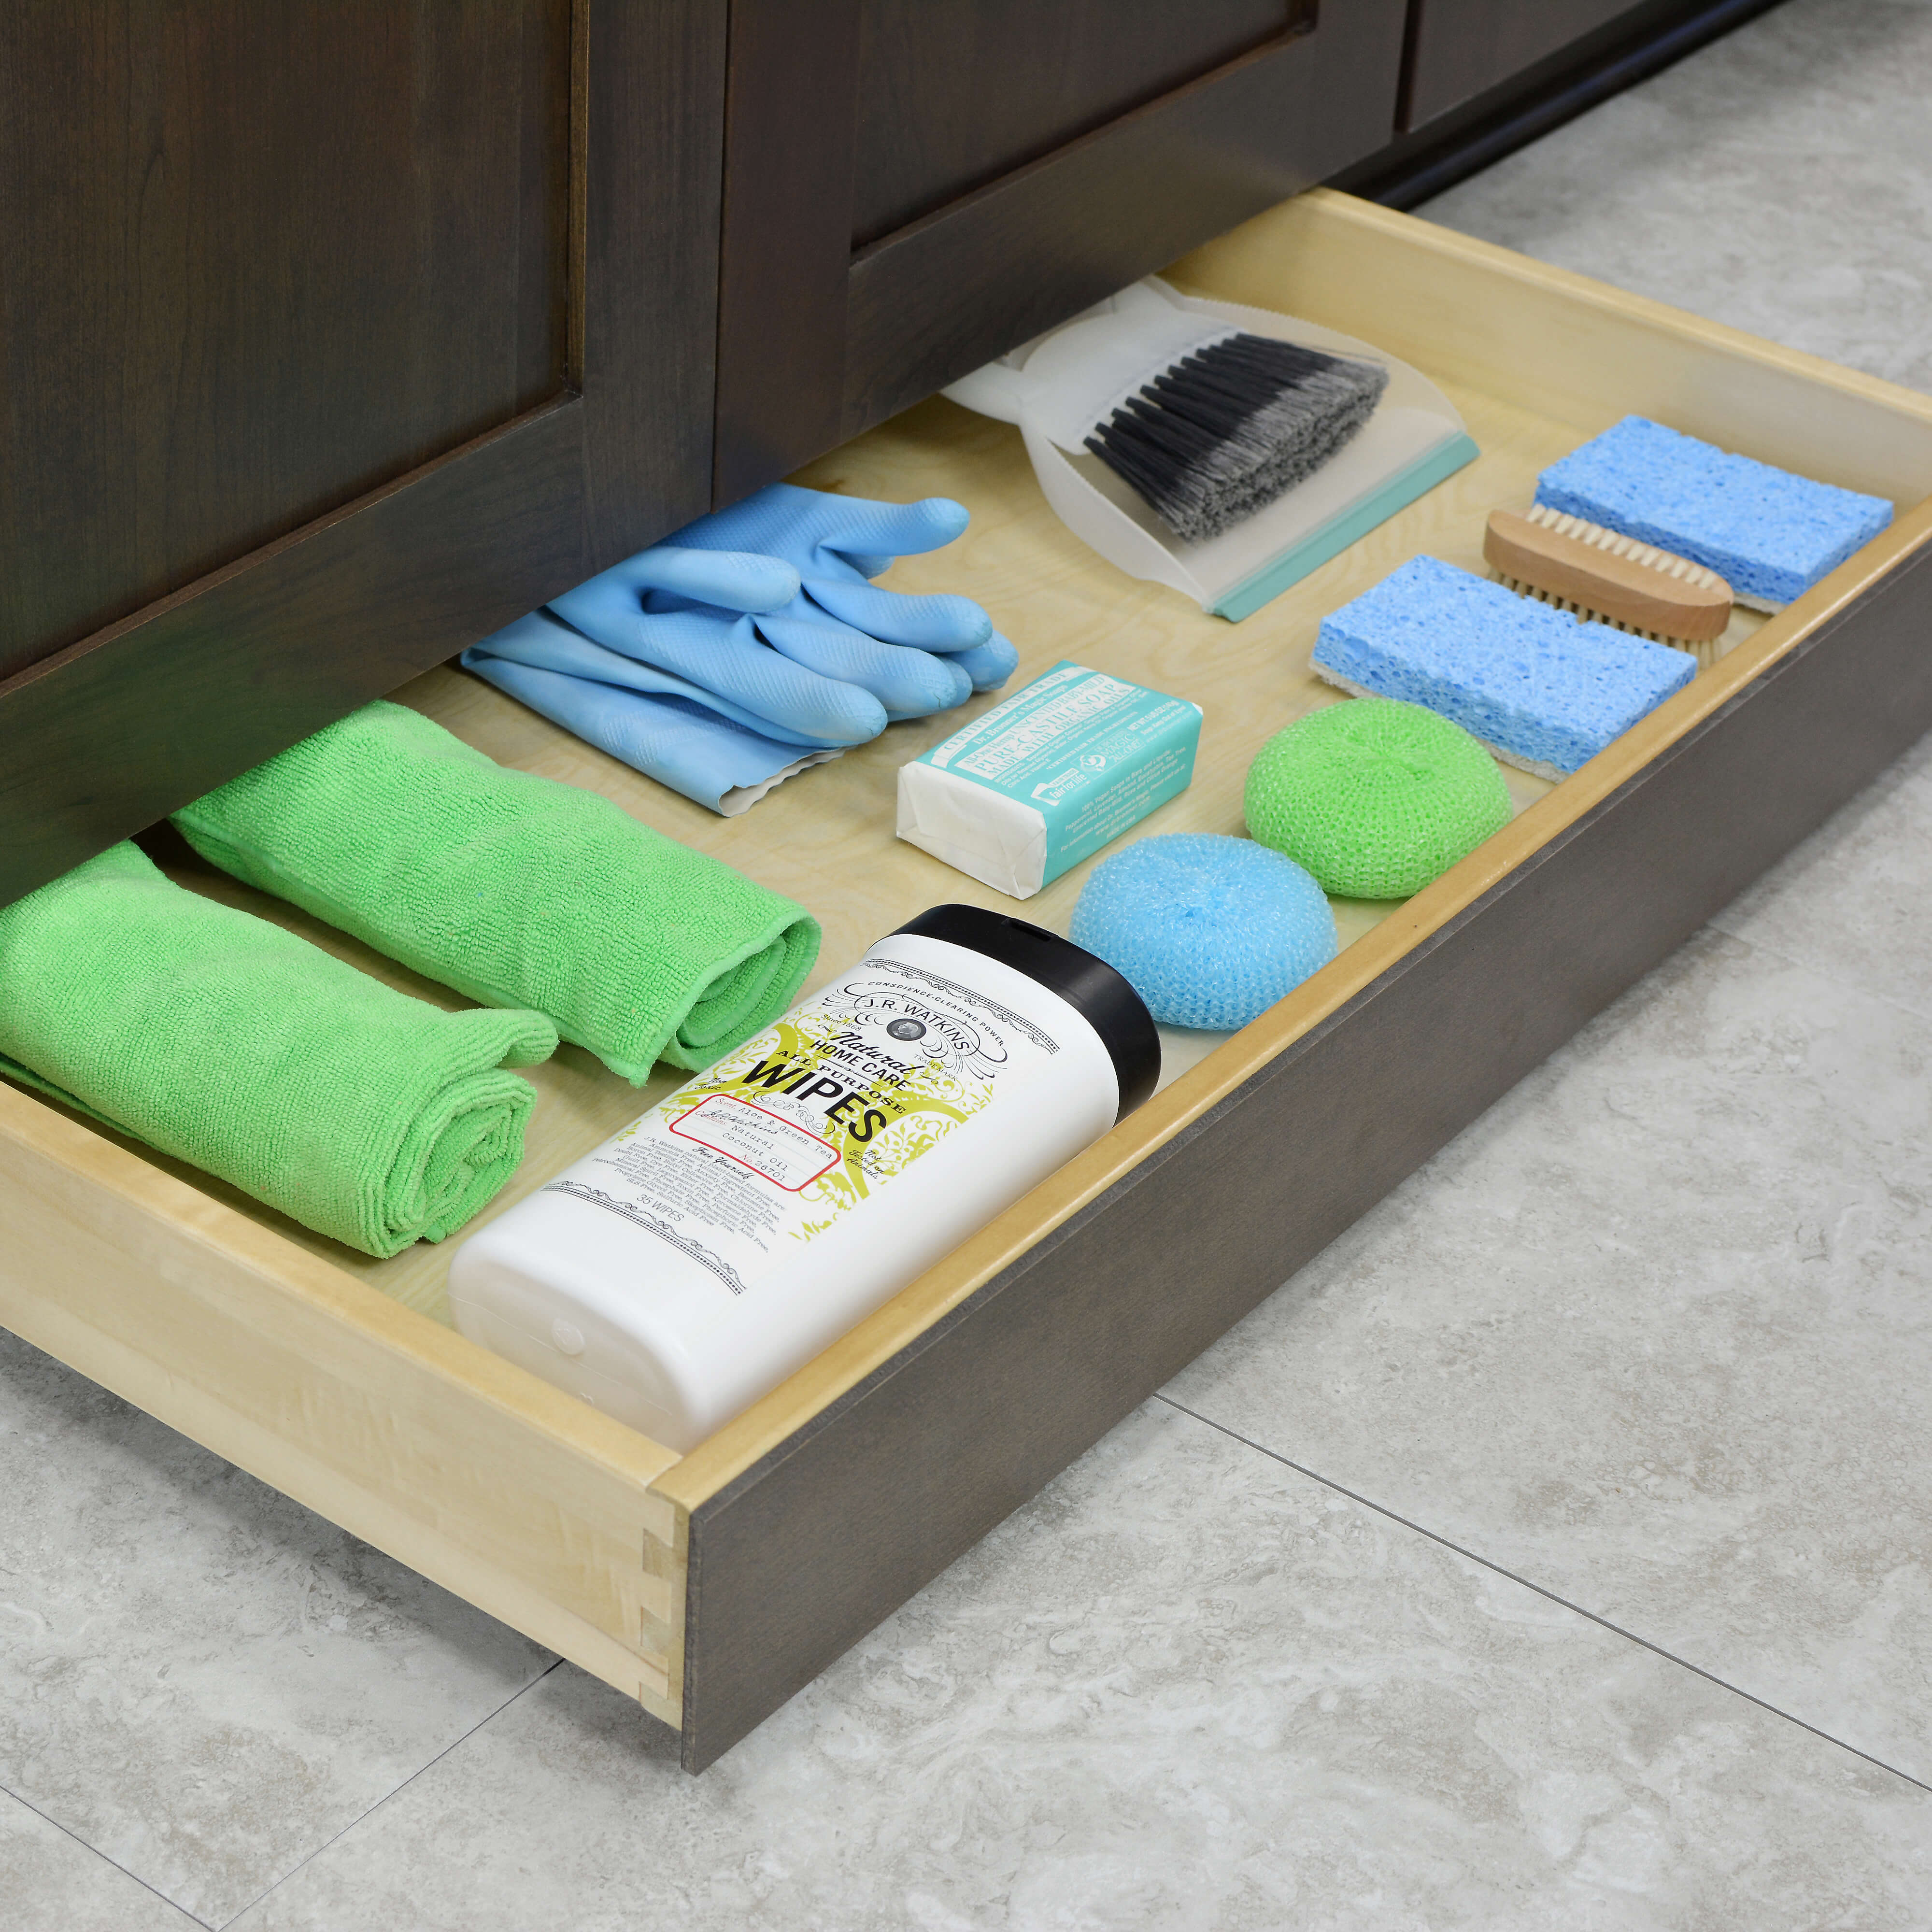 A toe kick drawer near an area that requires frequent cleaning, link at a kitchen island or near a kitchen sink can provide a space to store cleaning supplies close at hand.